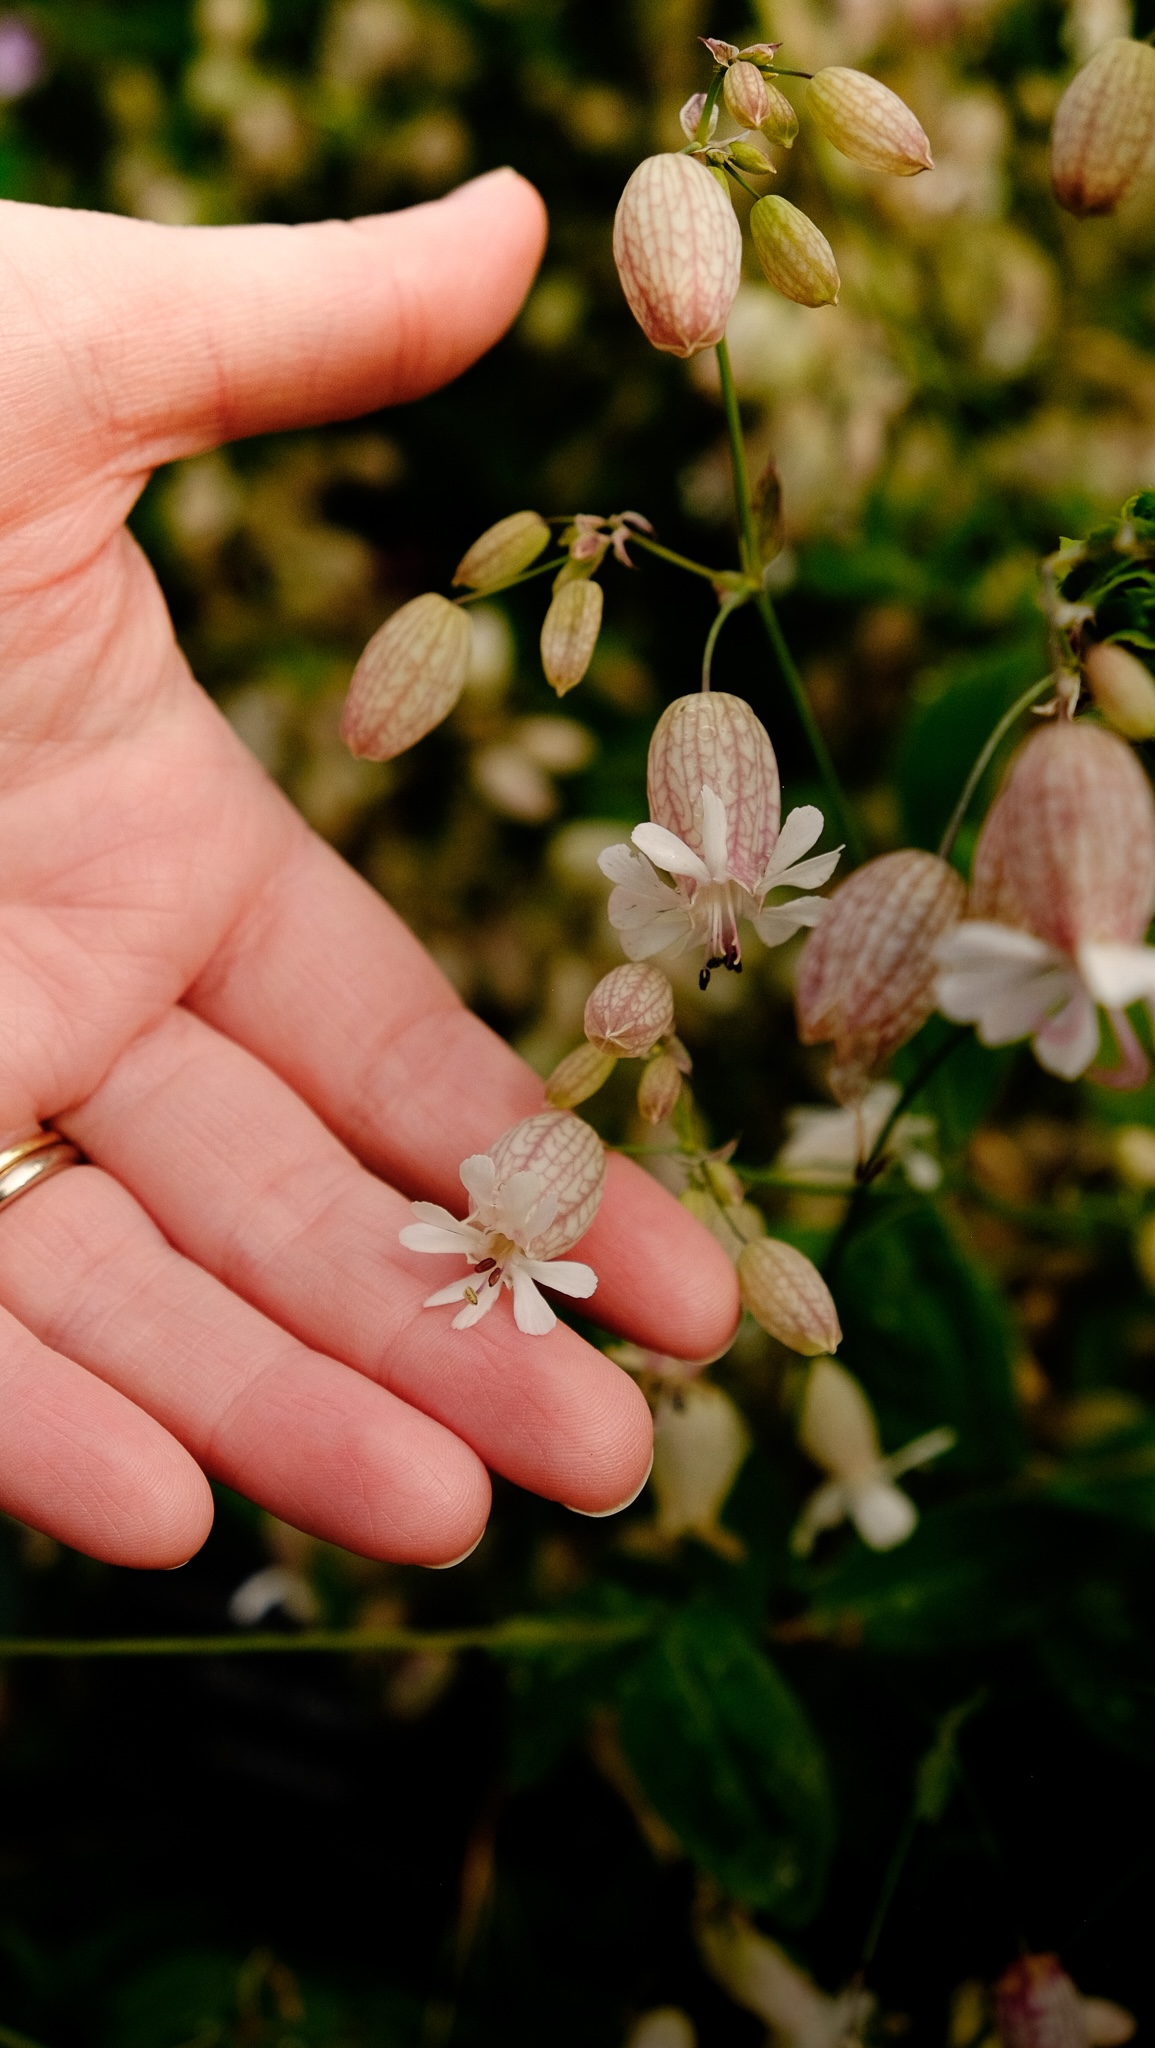 An intricate and delicate pink and white flower held gently in 2 fingers of an open hand